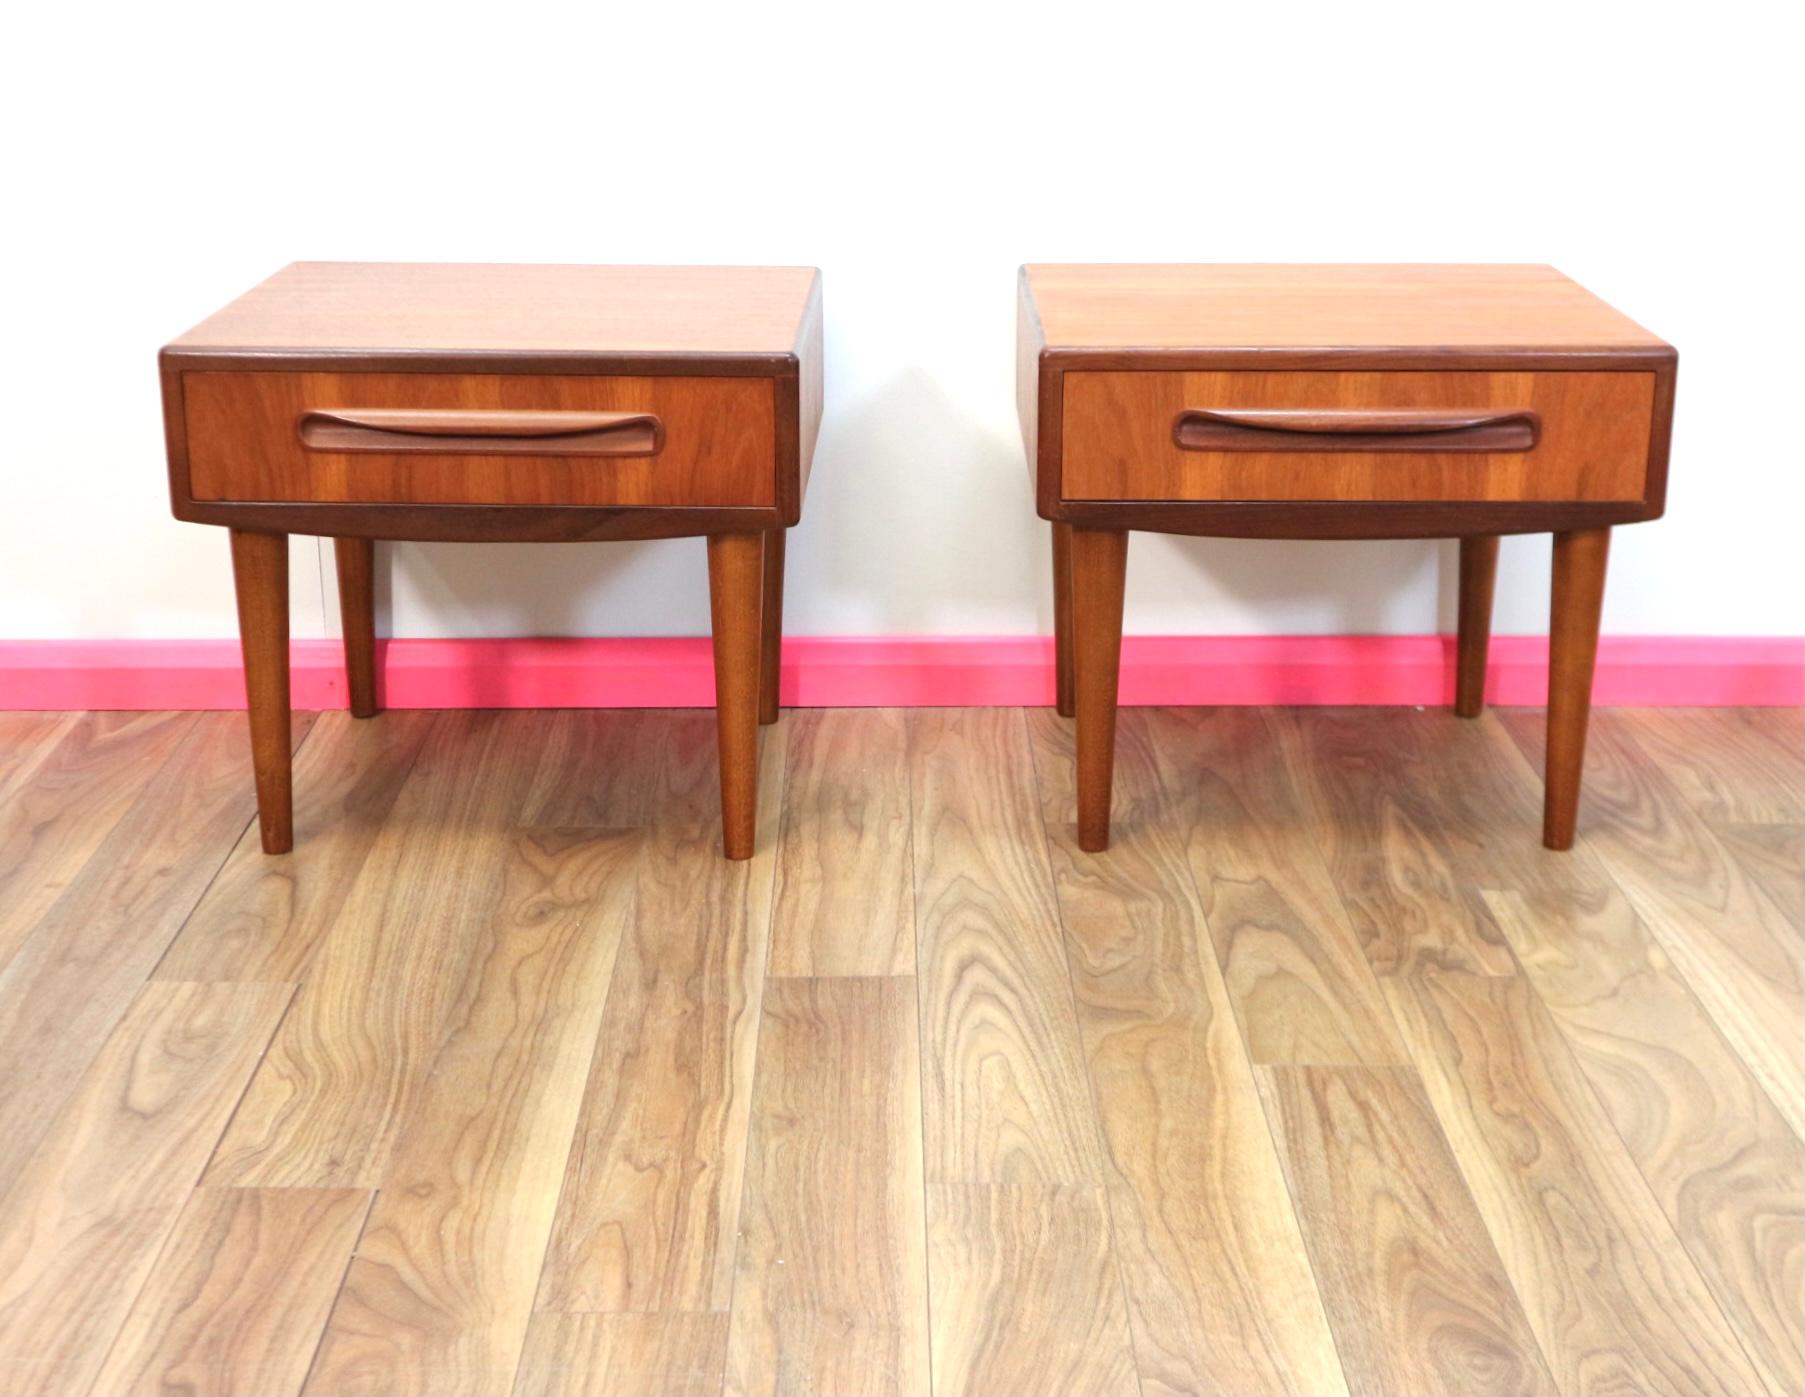 These stunning mid-century nightstands were manufacturedby G Plan in the 1960s.

Produced in teak, the cabinets look great on torpedo legs, with a simple minimalist design they make a striking vintage set. In excellent condition for their